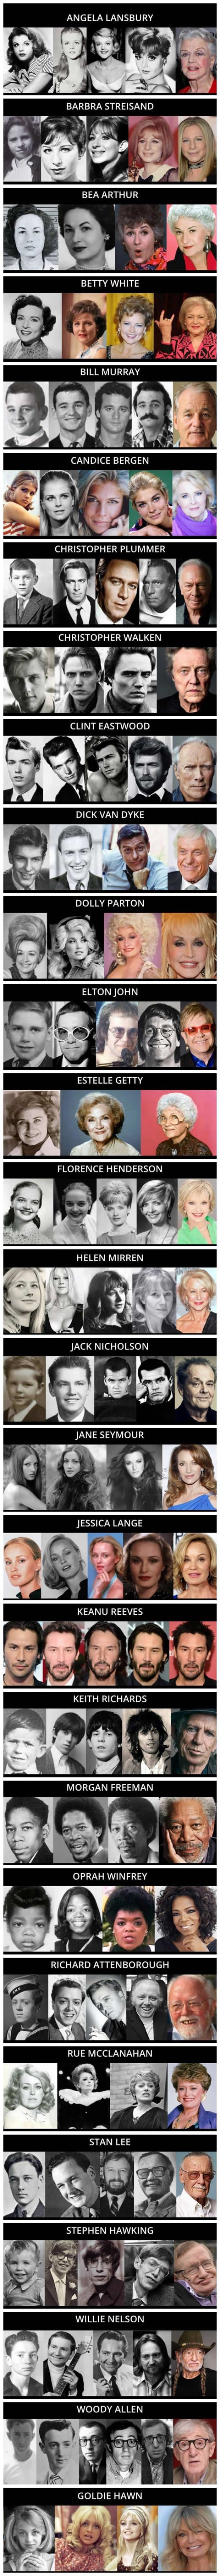 celebs aging timeline funny picture